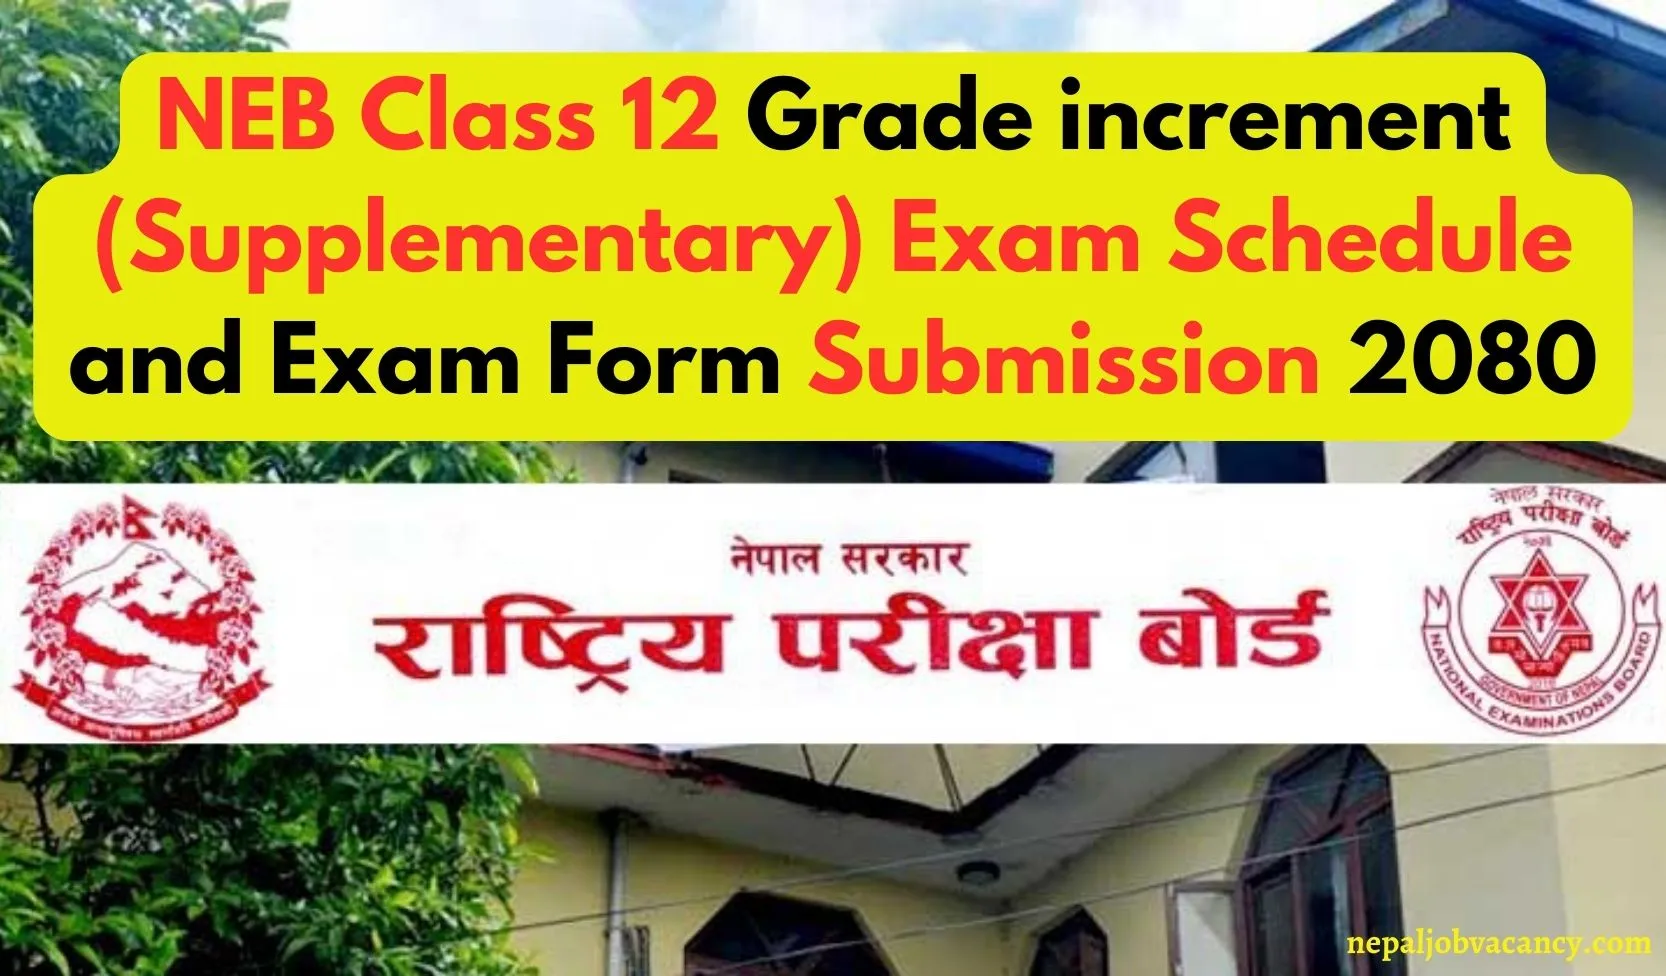 NEB Class 12 Grade increment (Supplementary) Exam Schedule and Exam Form Submission 2080